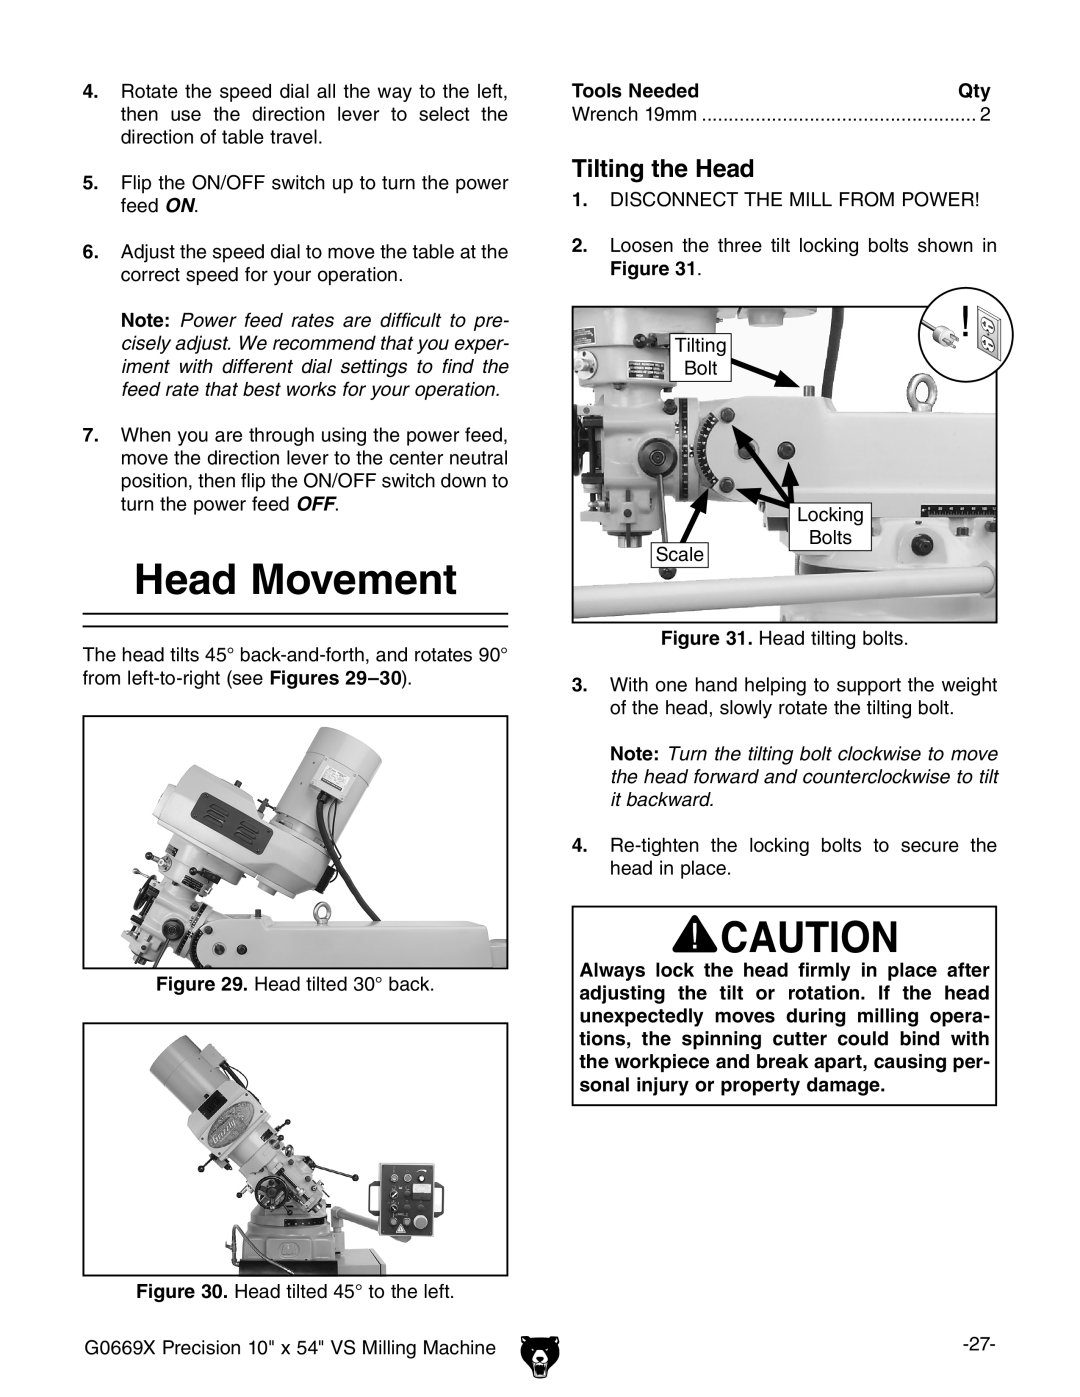 Grizzly g0669X owner manual Head Movement, Tilting the Head, Tools Needed 